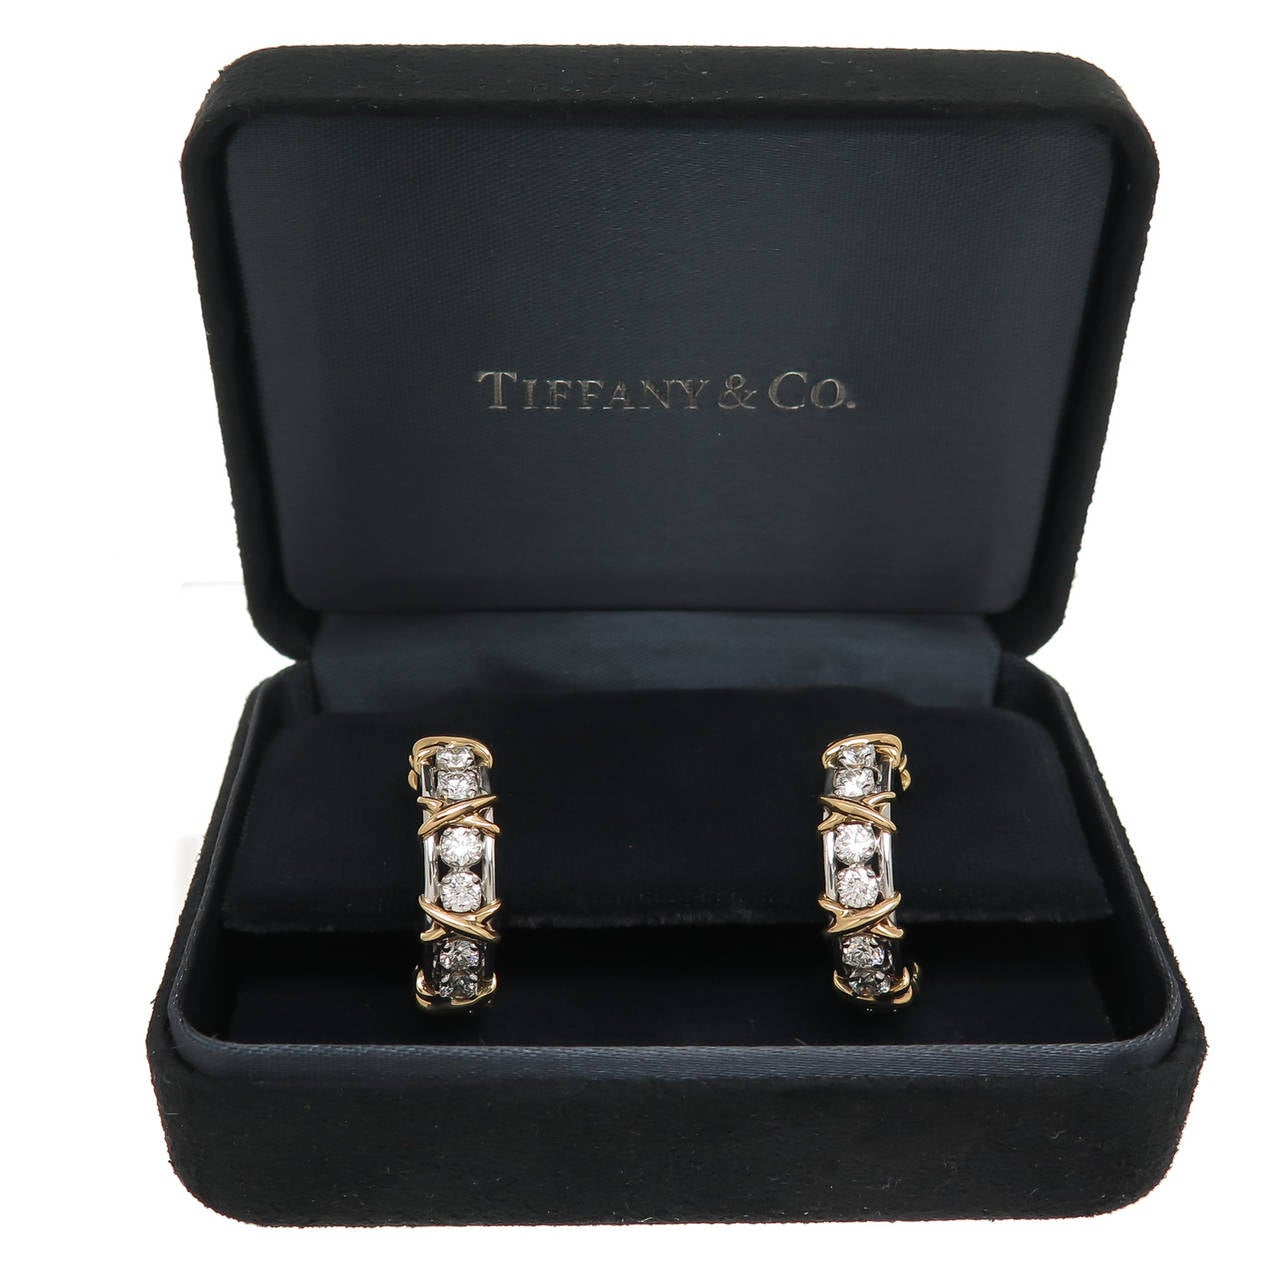 Circa 2005 Jean Schlumberger for Tiffany & Company X Hoop Earrings, 18K Yellow Gold with Diamonds set in Platinum. Containing 20 Round Brilliant cut fine White Diamonds totaling 1.80 Carats. Measuring 7/8 inch in length and 3/16 inch wide. In